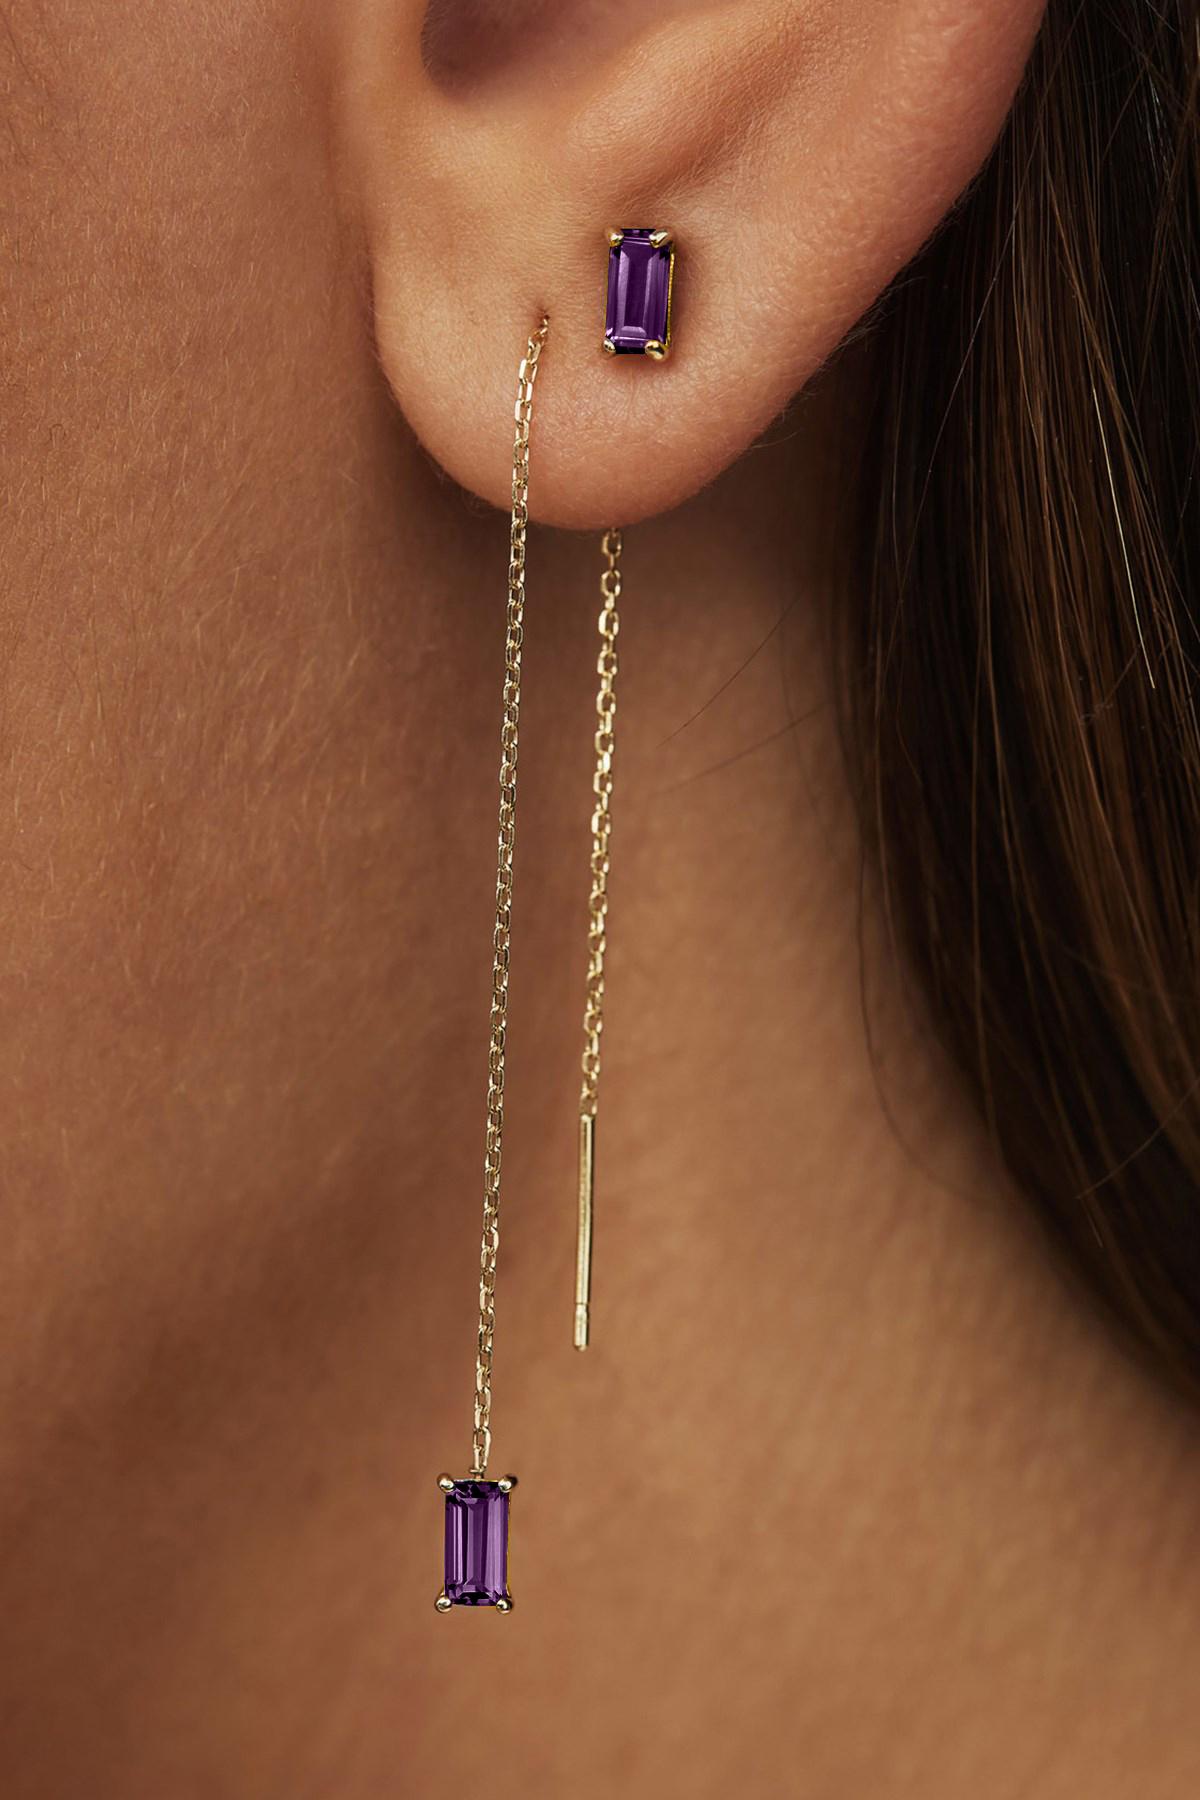  14k solid gold drop earrings with amethysts.  Natural amethysts solid gold earrings. Chain earrings.Baguette Earrings Dangle. Delicate Solid Gold chain Earrings.  14K Solid Gold Threader Chain Earrings

Metal: 14 karat yellow gold
Weight: 0.8-0.9